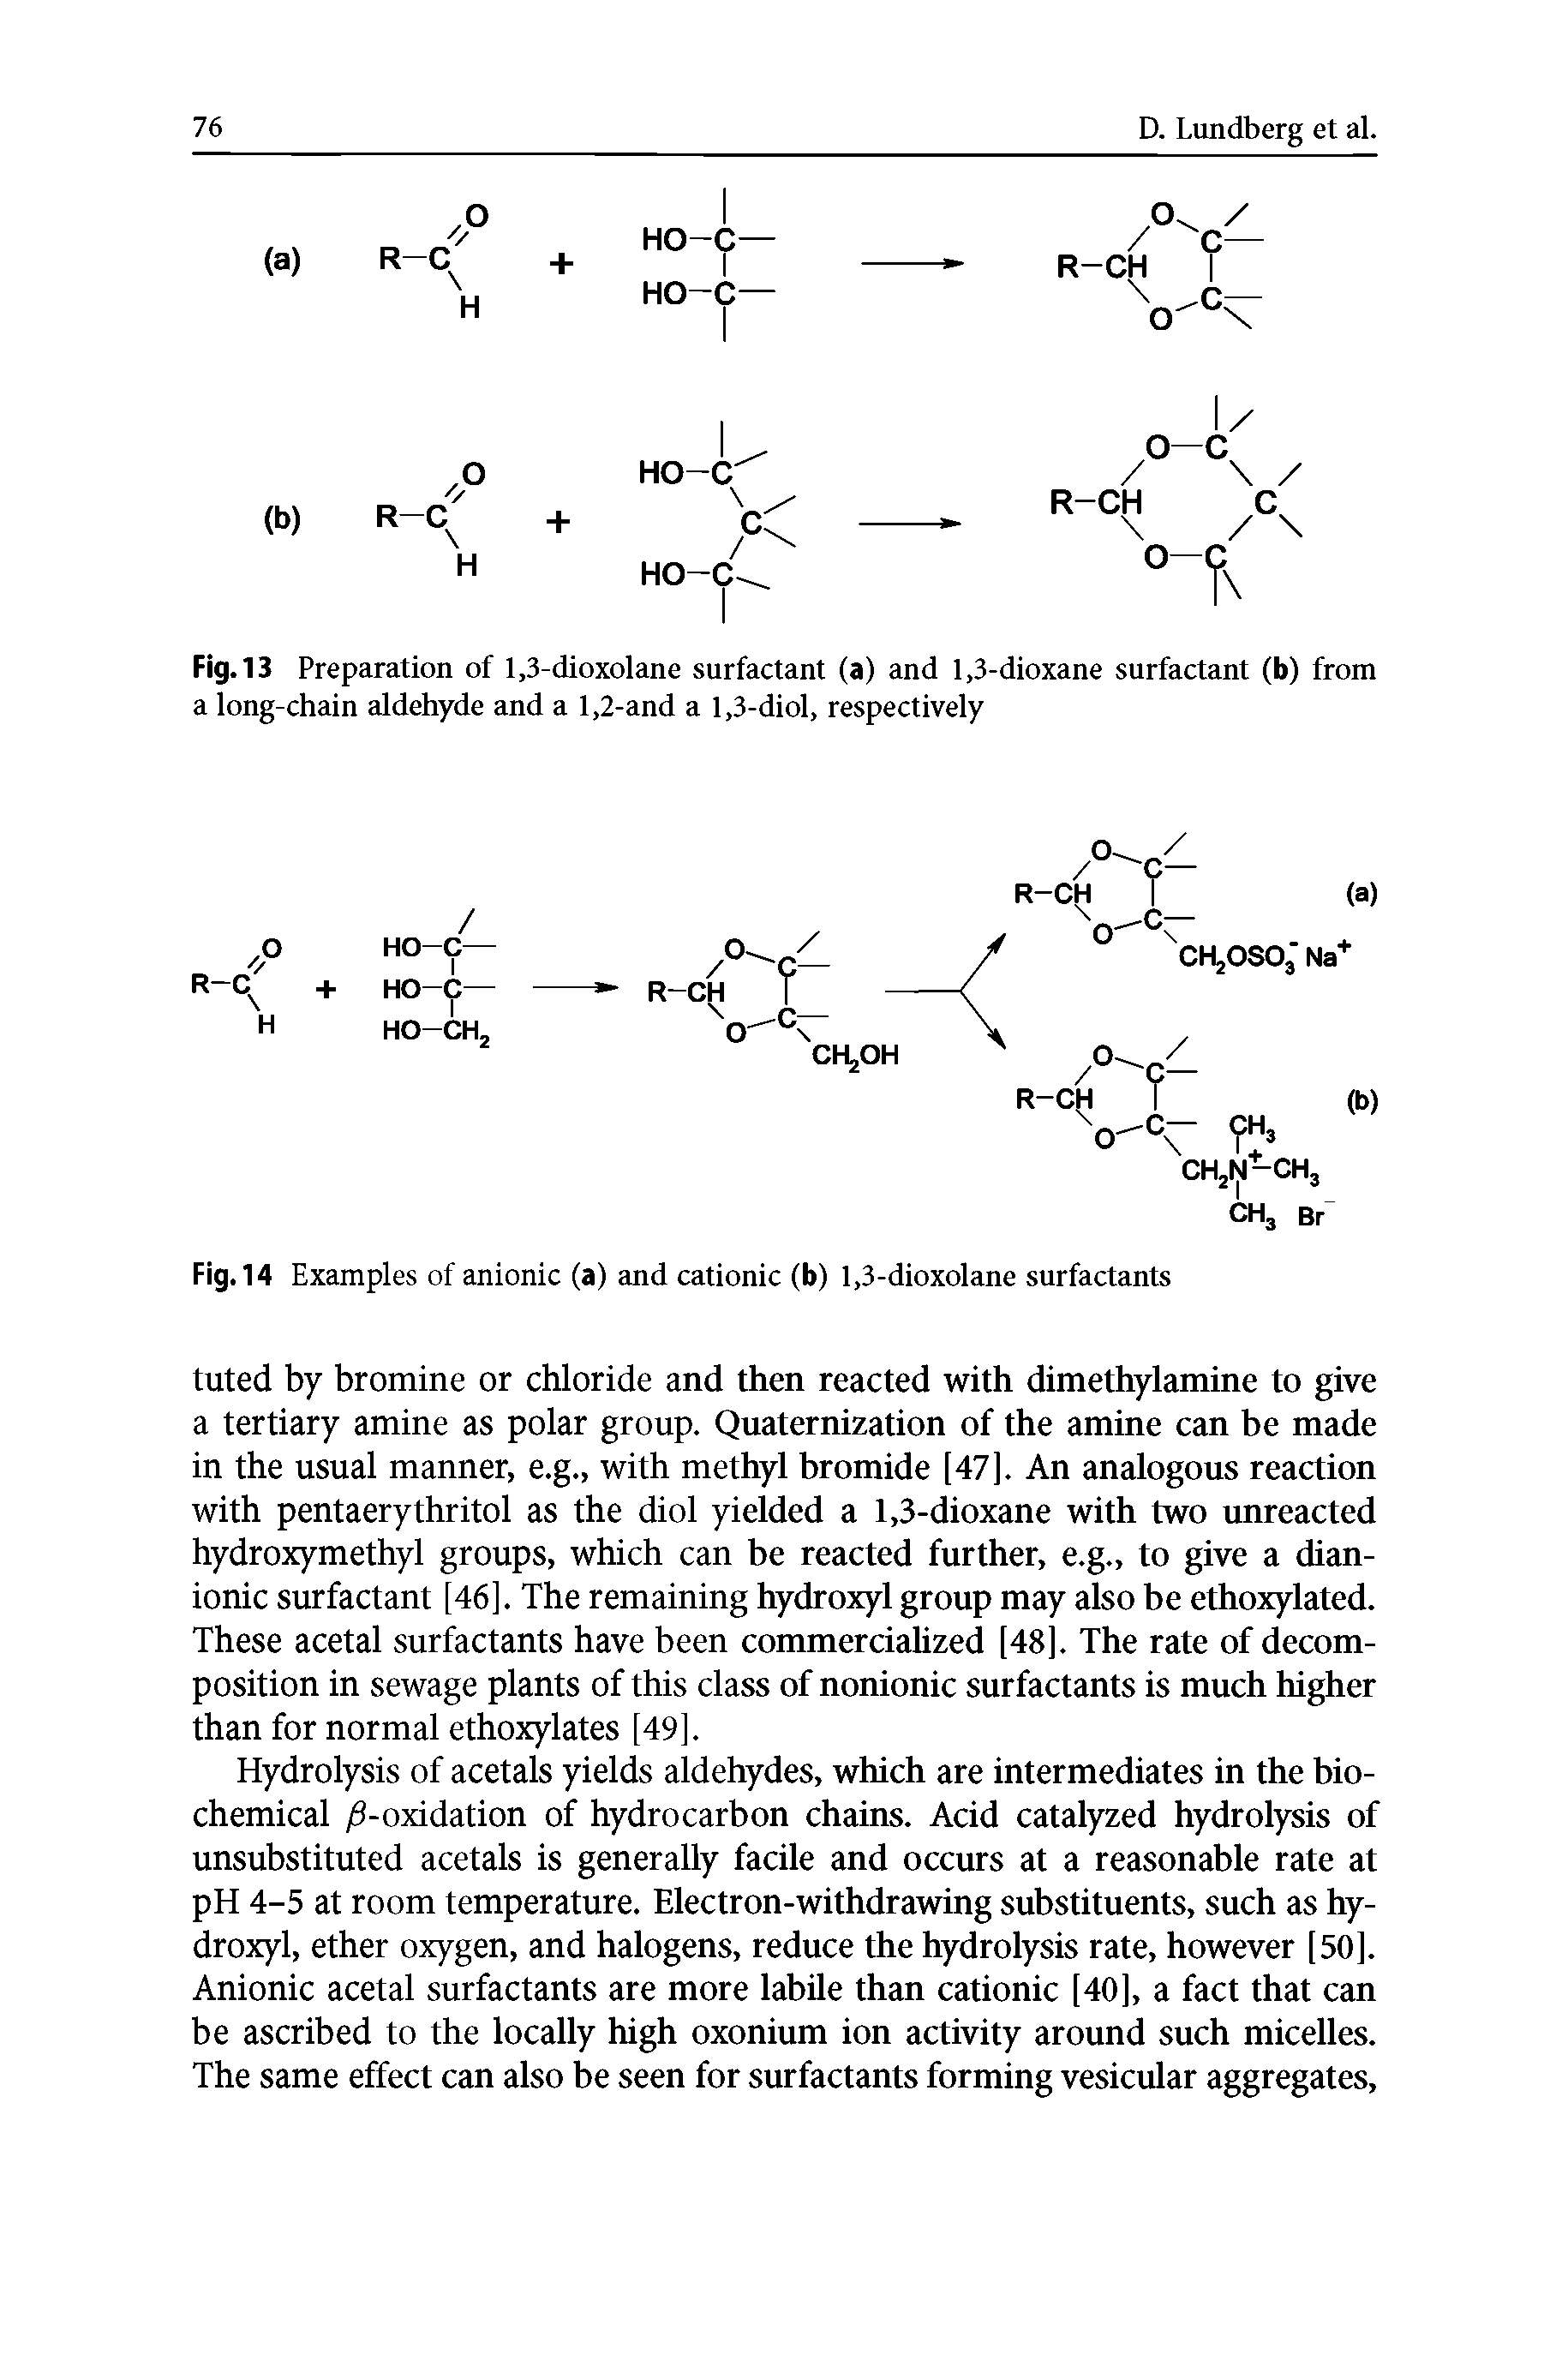 Fig.13 Preparation of 1,3-dioxolane surfactant (a) and 1,3-dioxane surfactant (b) from a long-chain aldehyde and a 1,2-and a 1,3-diol, respectively...